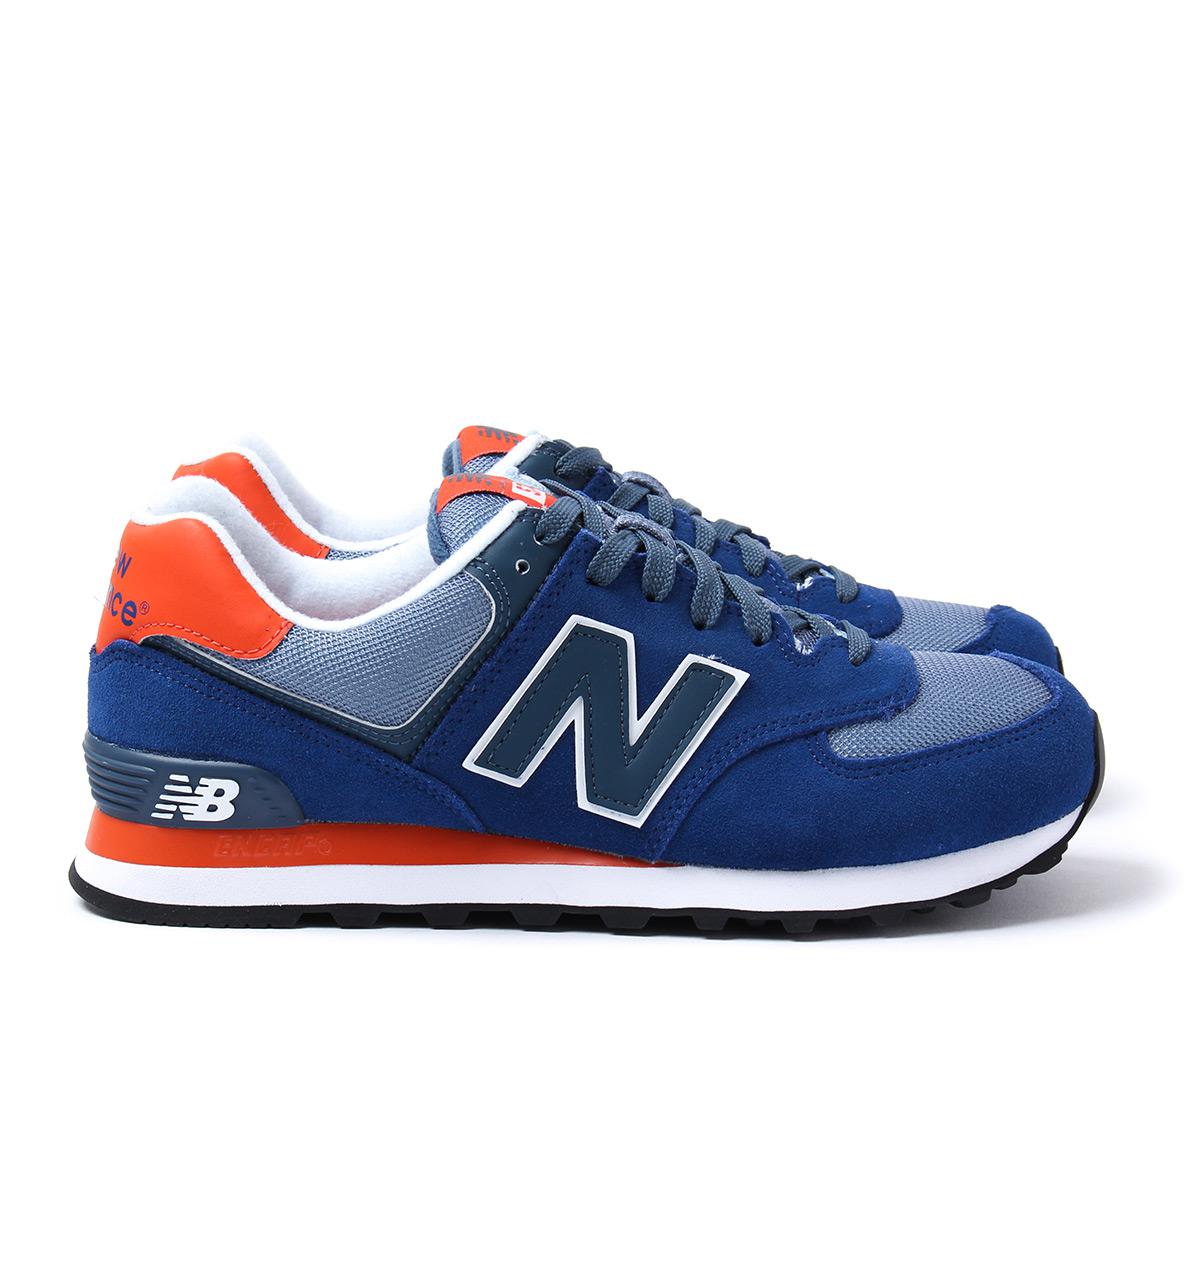 new balance blue suede 574 trainers